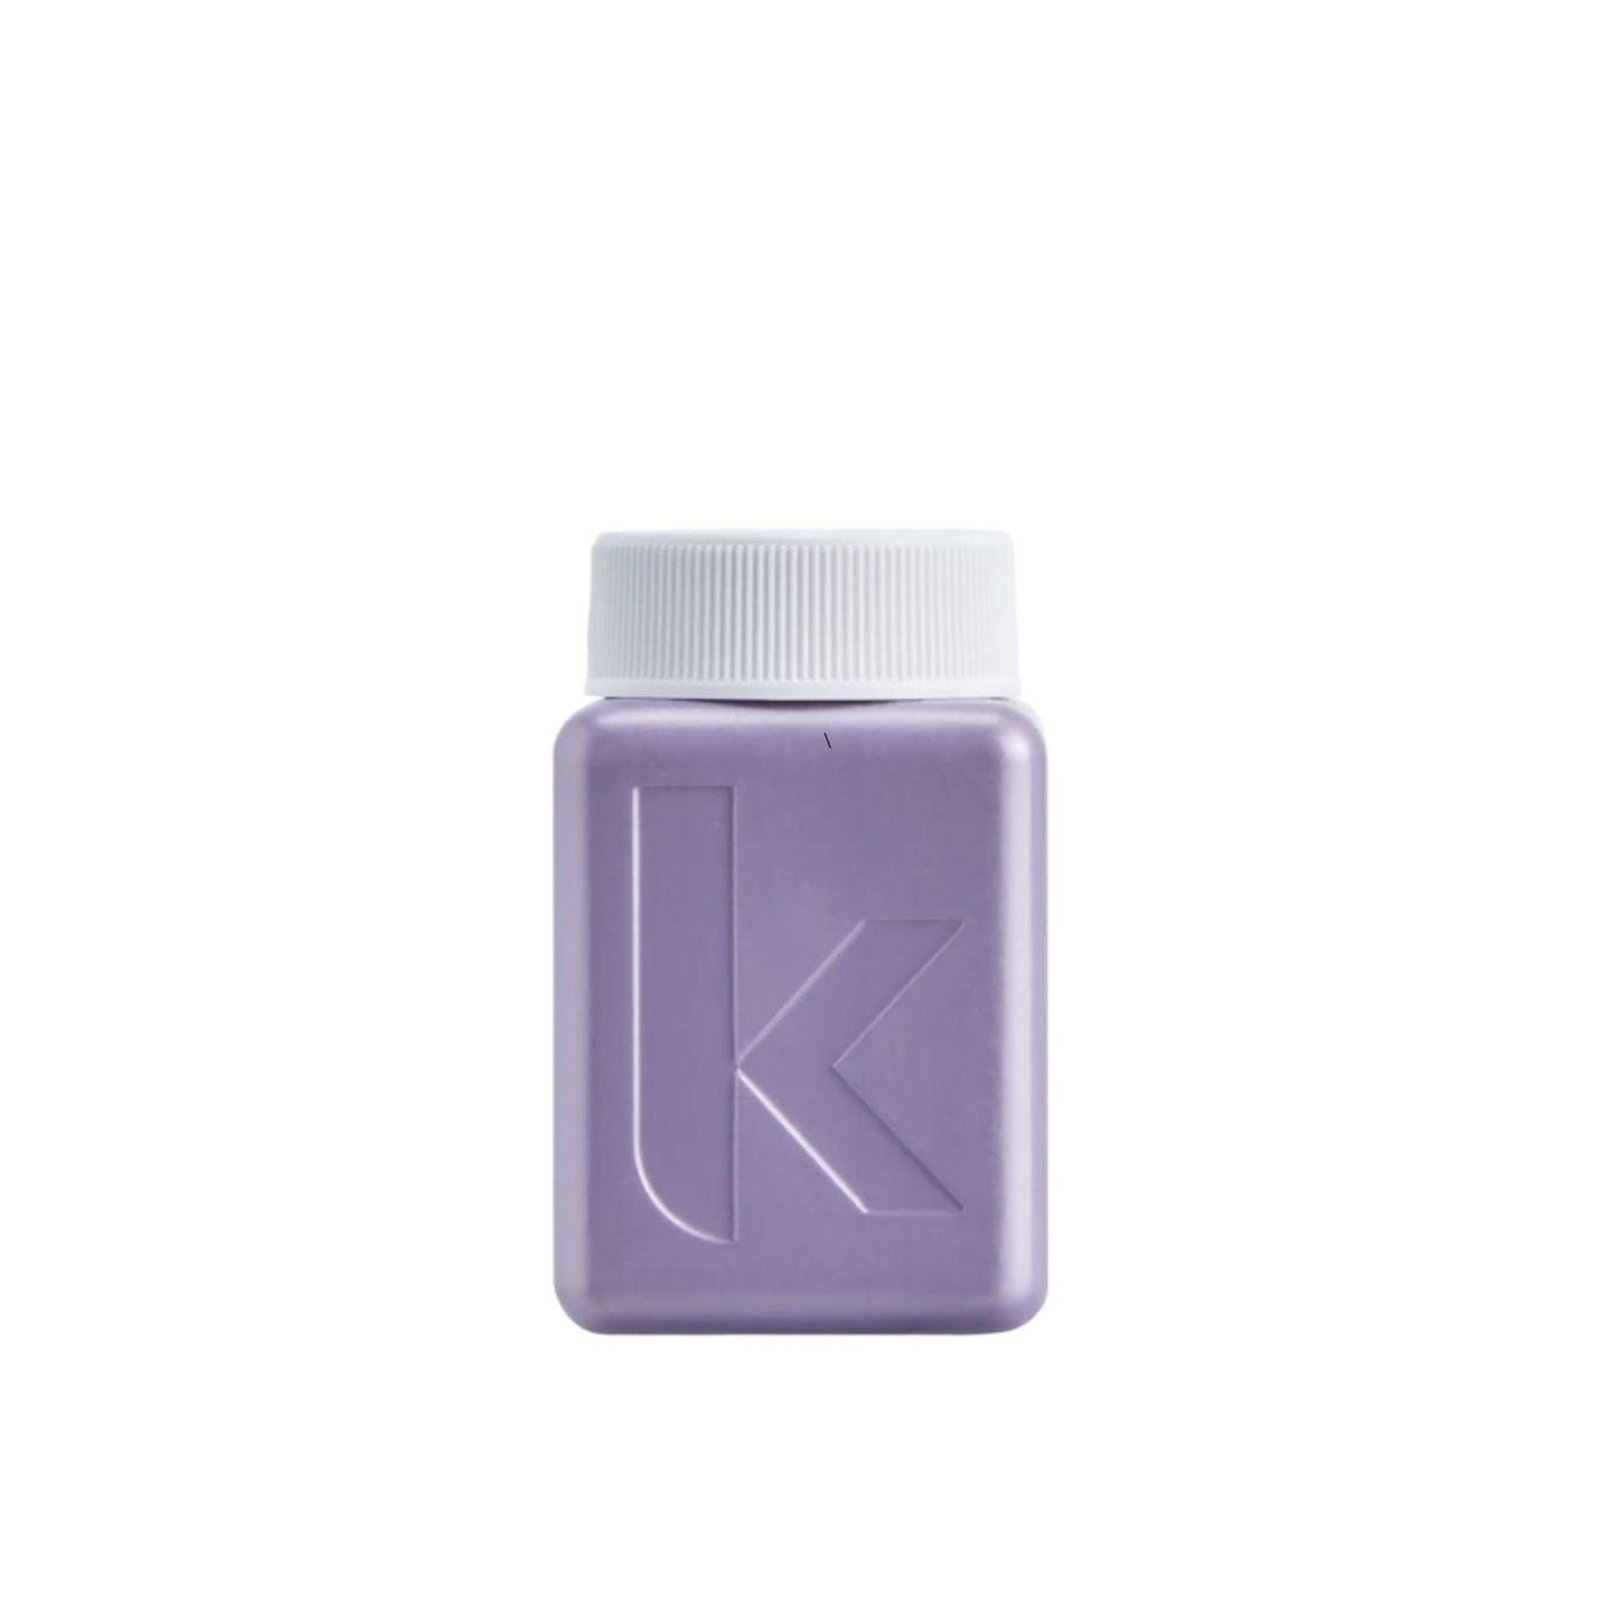 Kevin Murphy Hydrate-Me Rinse Conditioner 40ml (1.4 fl oz)